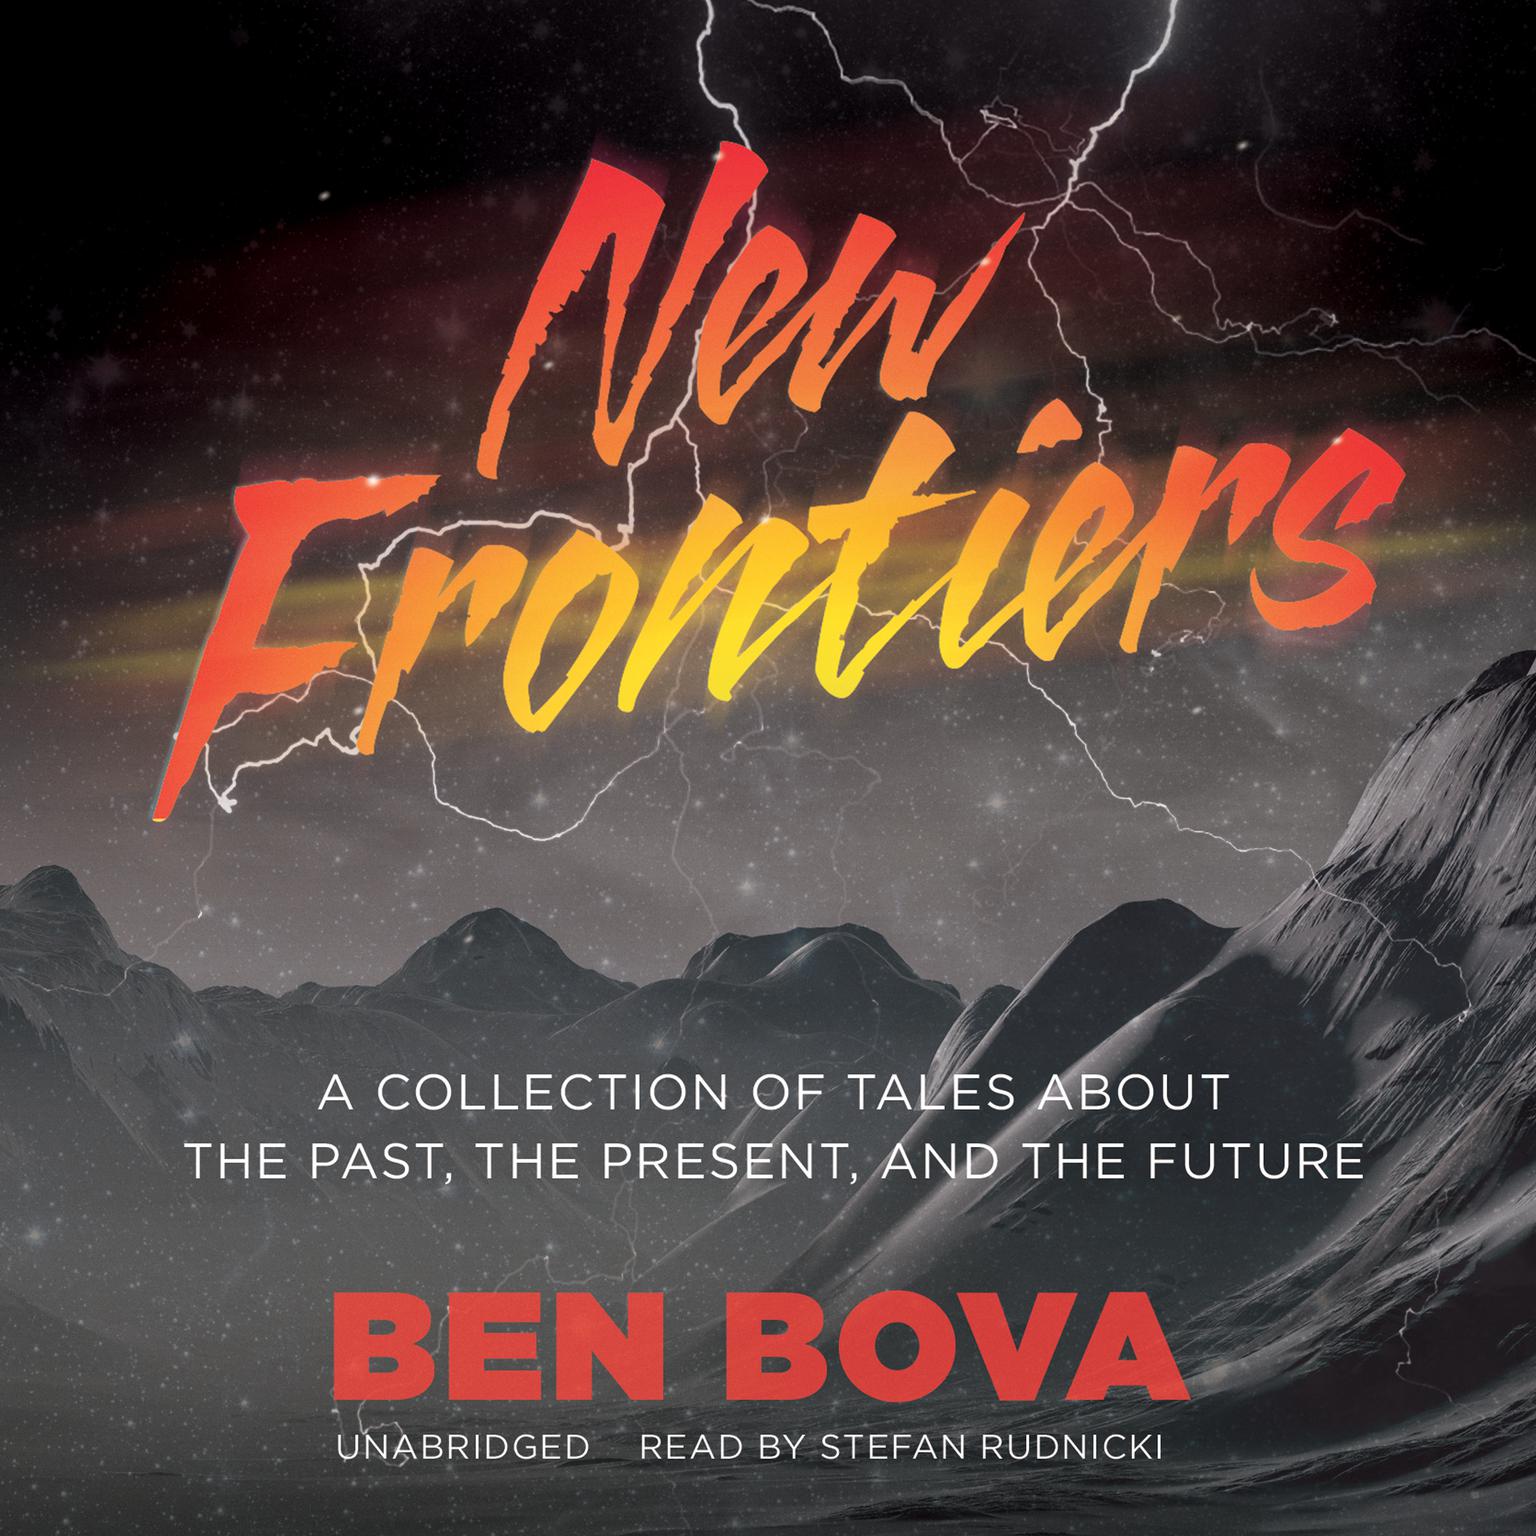 New Frontiers: A Collection of Tales about the Past, the Present, and the Future Audiobook, by Ben Bova